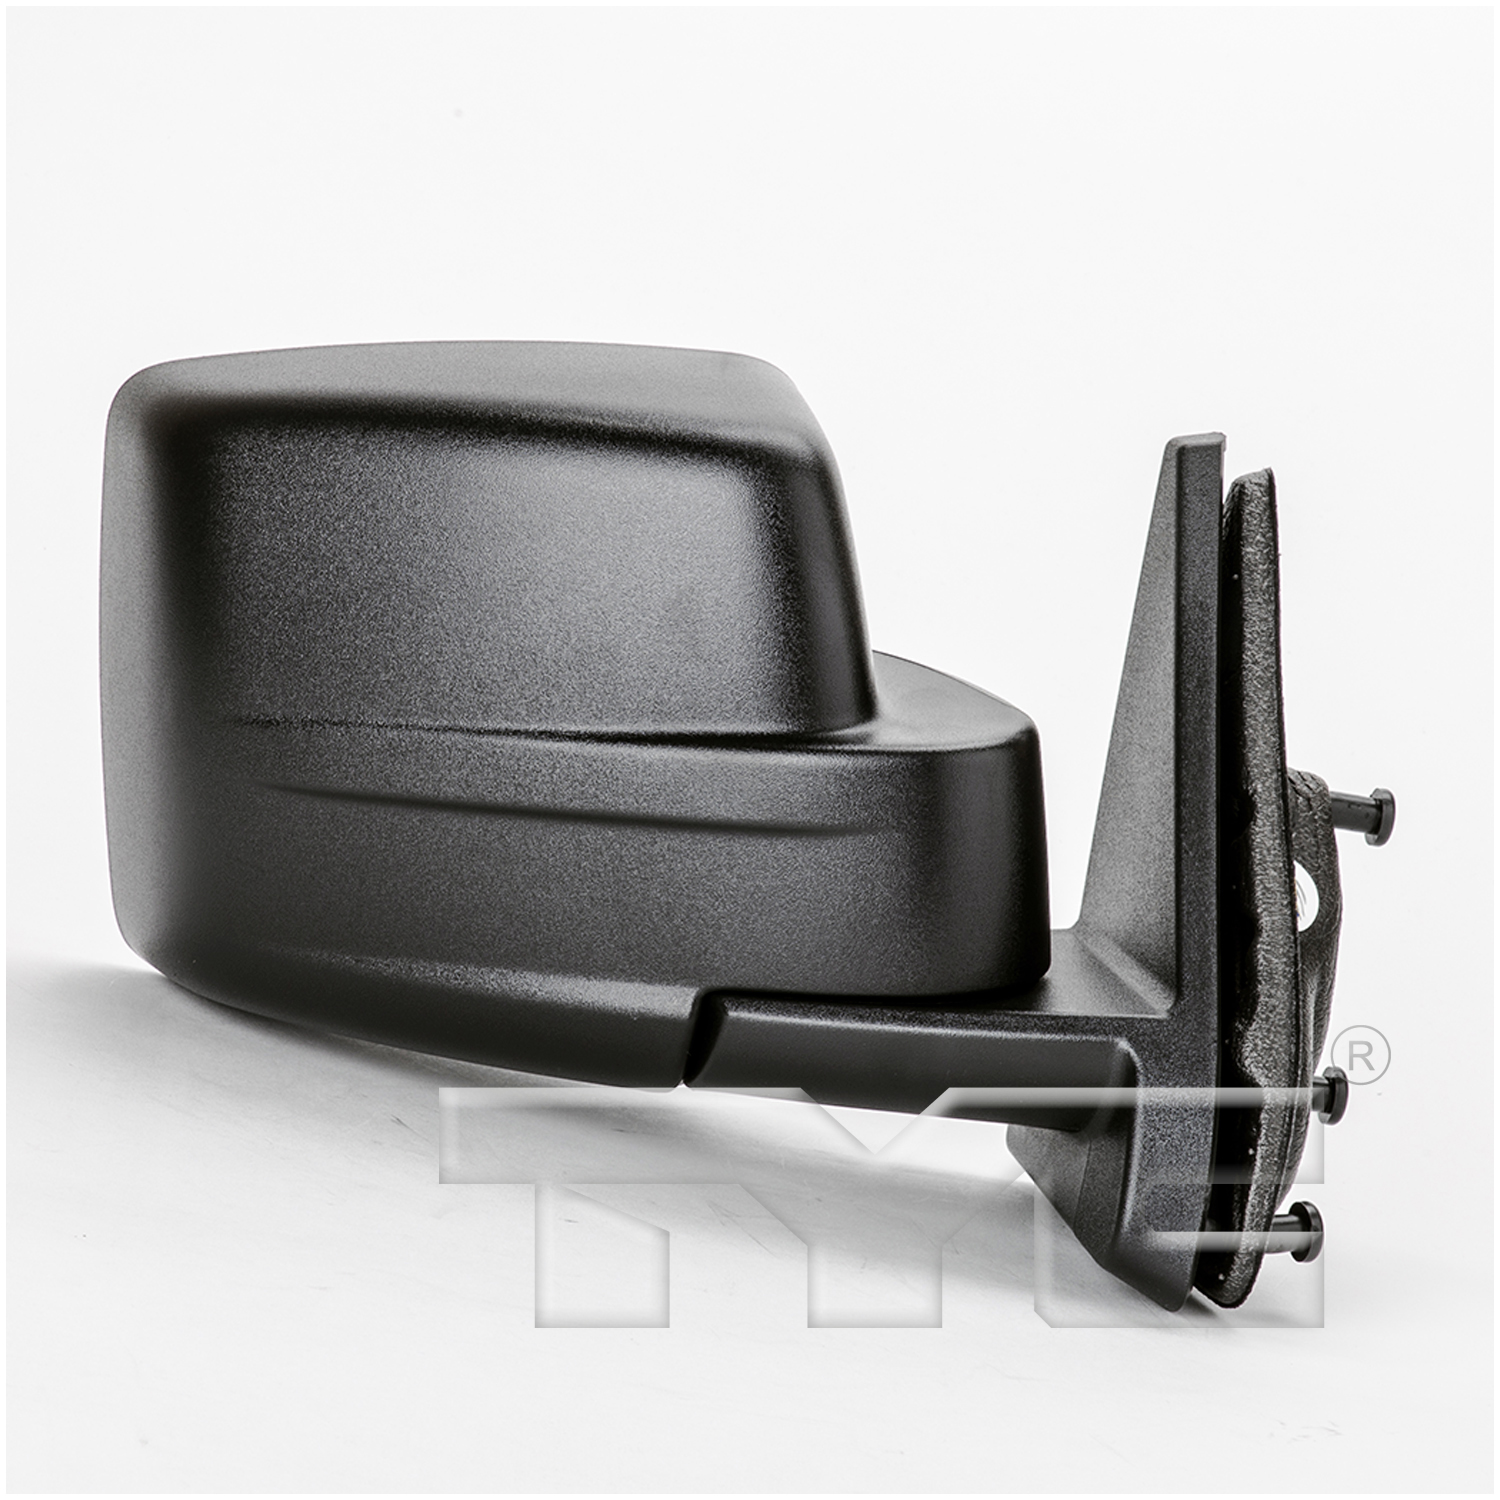 Aftermarket MIRRORS for JEEP - PATRIOT, PATRIOT,08-09,RT Mirror outside rear view